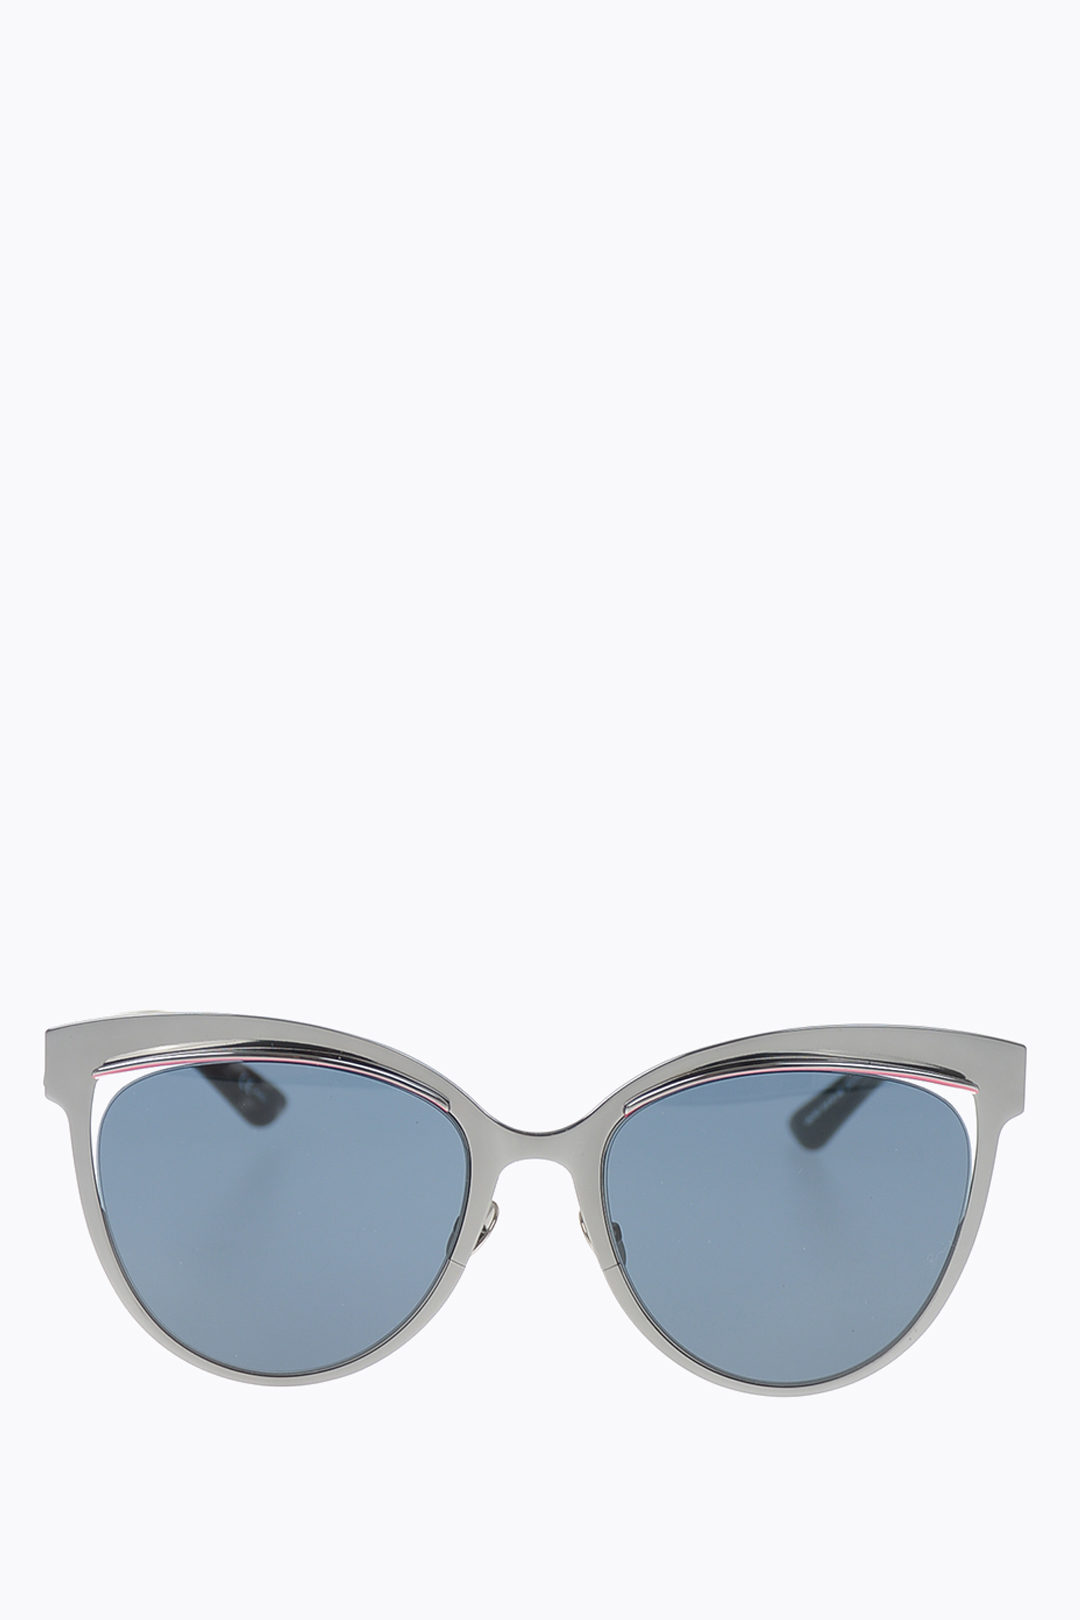 Dior Cat eye DIORINSPIRED Sunglasses women - Glamood Outlet